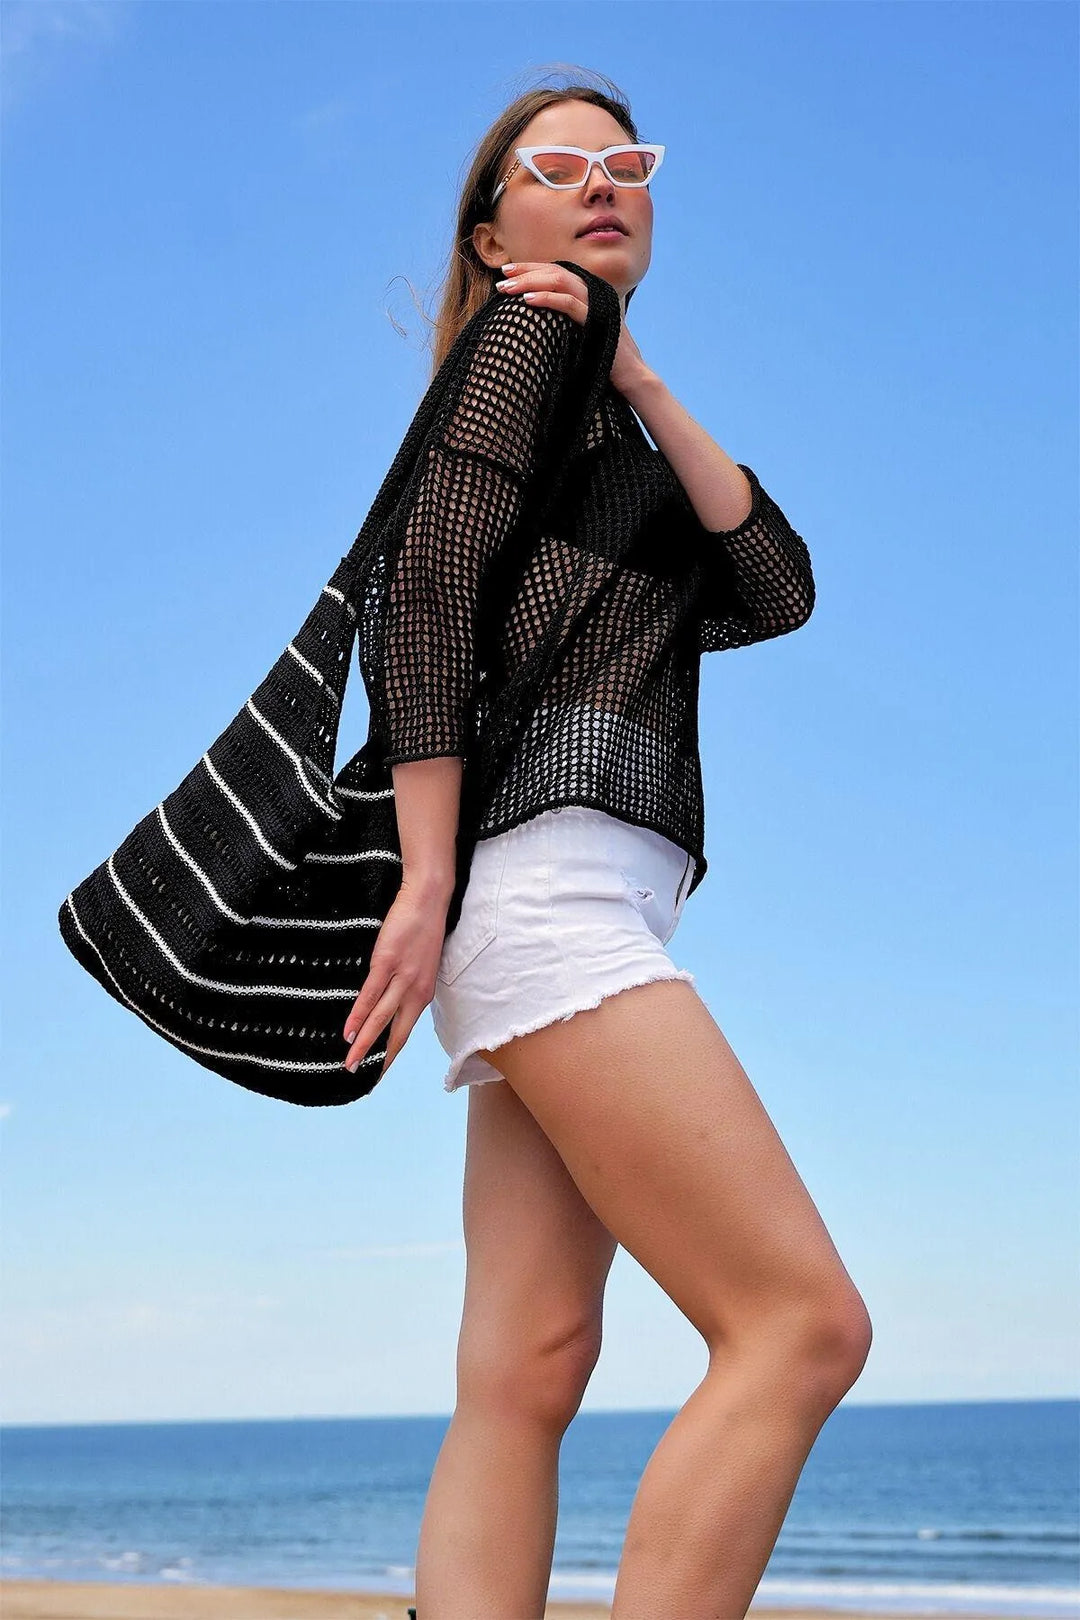 Striped Knitwear Cross Strap Casual Hand&Shoulder And Beach Bag Black- White